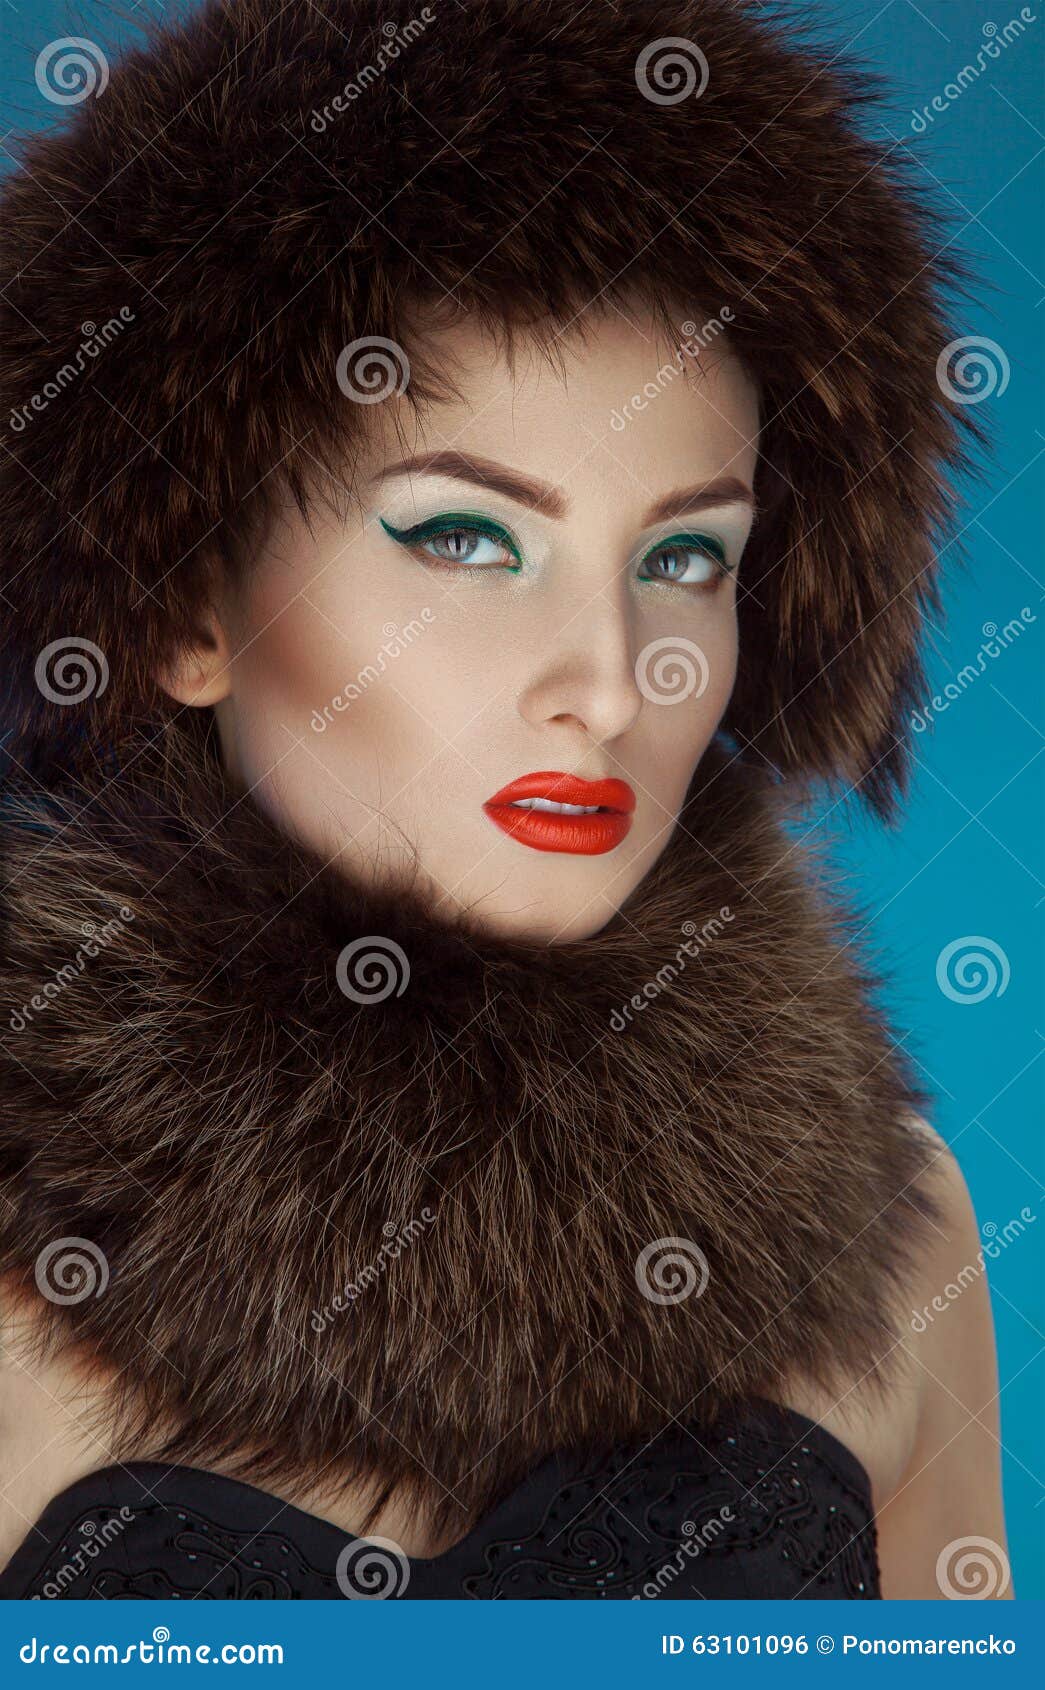 wonderful girl in a fur hat and scurf